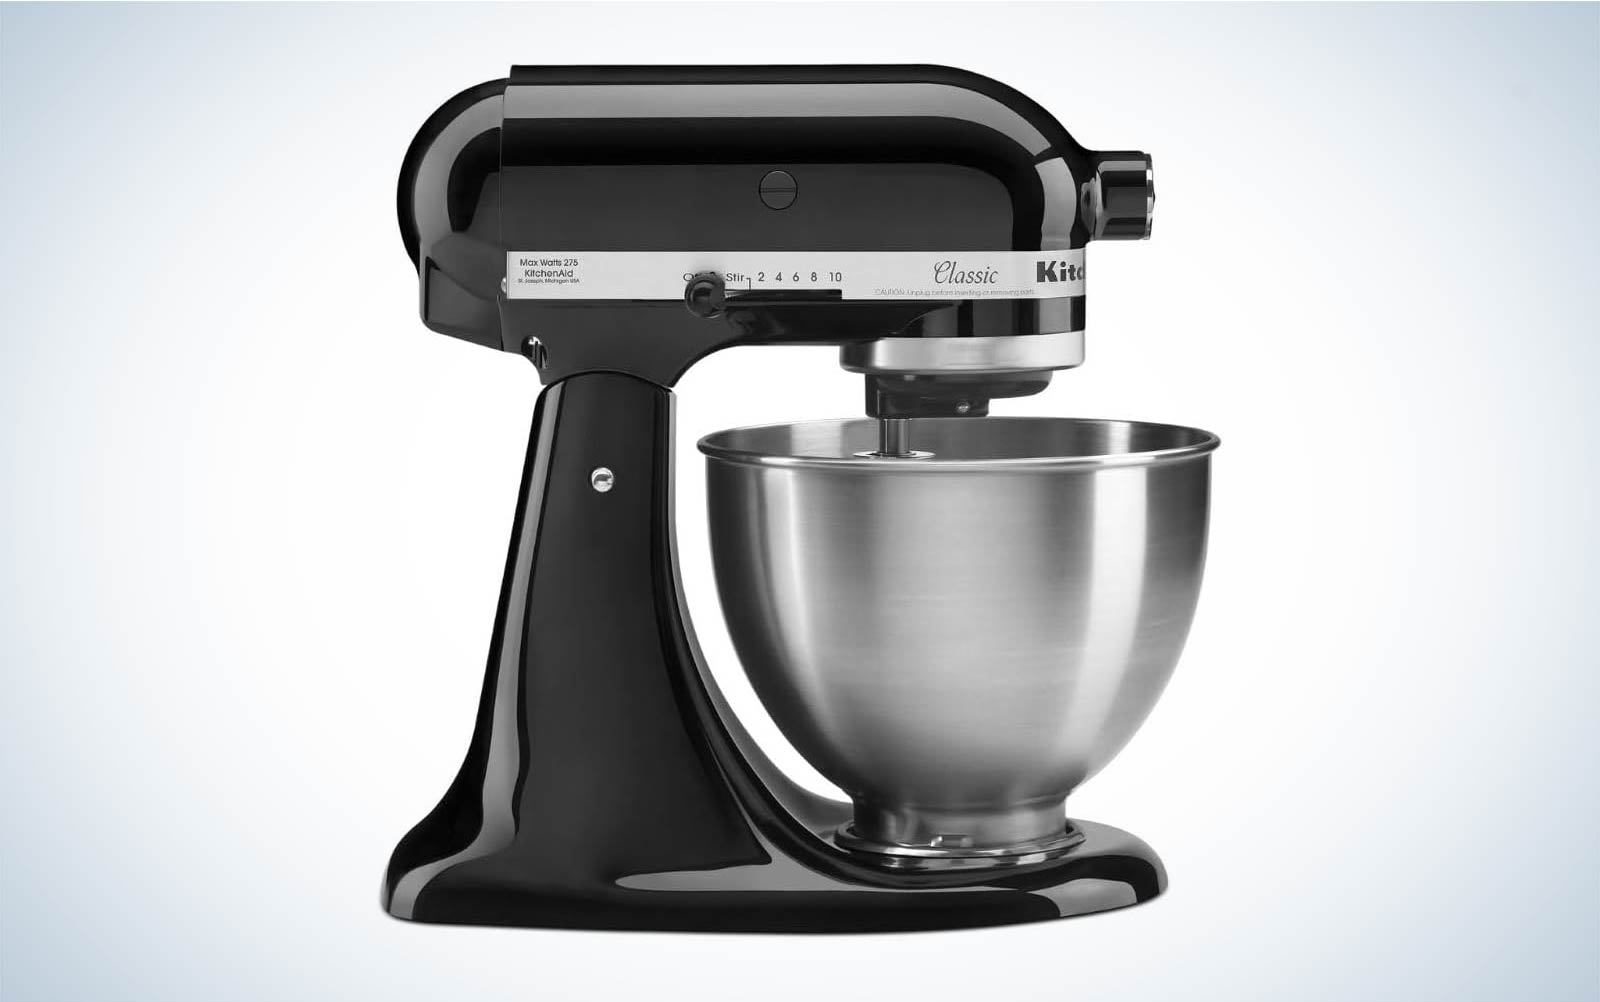 Slice up to 30% off KitchenAid mixers and more with this early